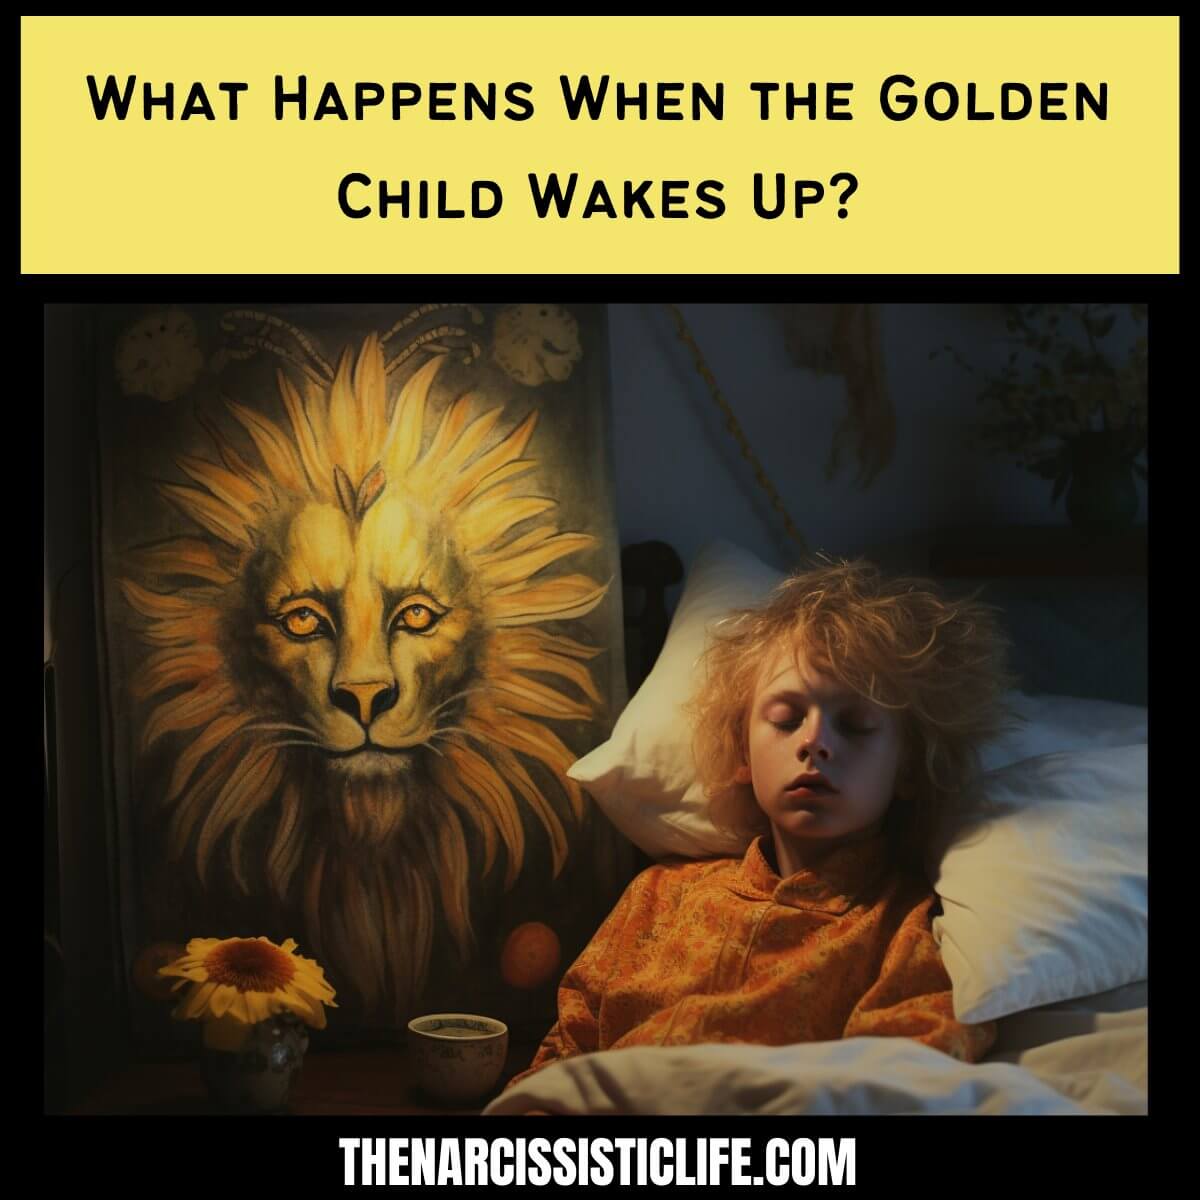 What Happens When the Golden Child Wakes Up?